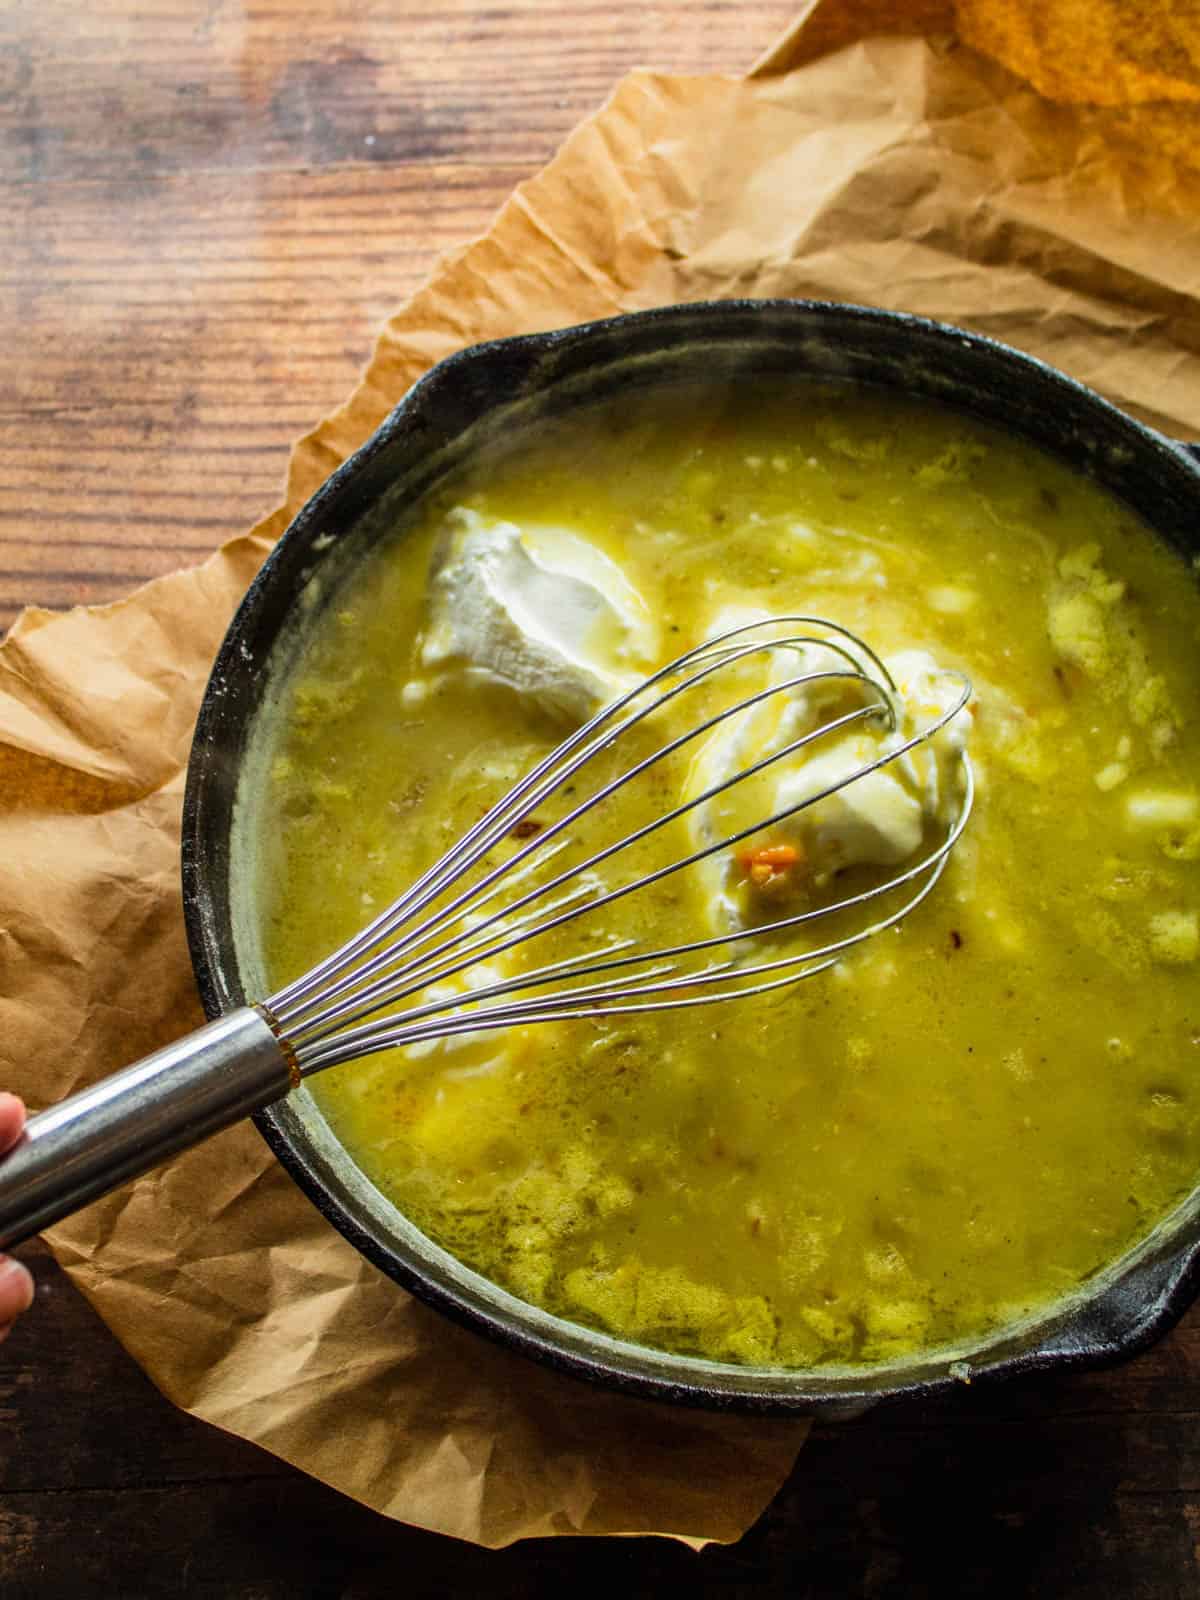 whisk stirring sour cream into a green chili sauce